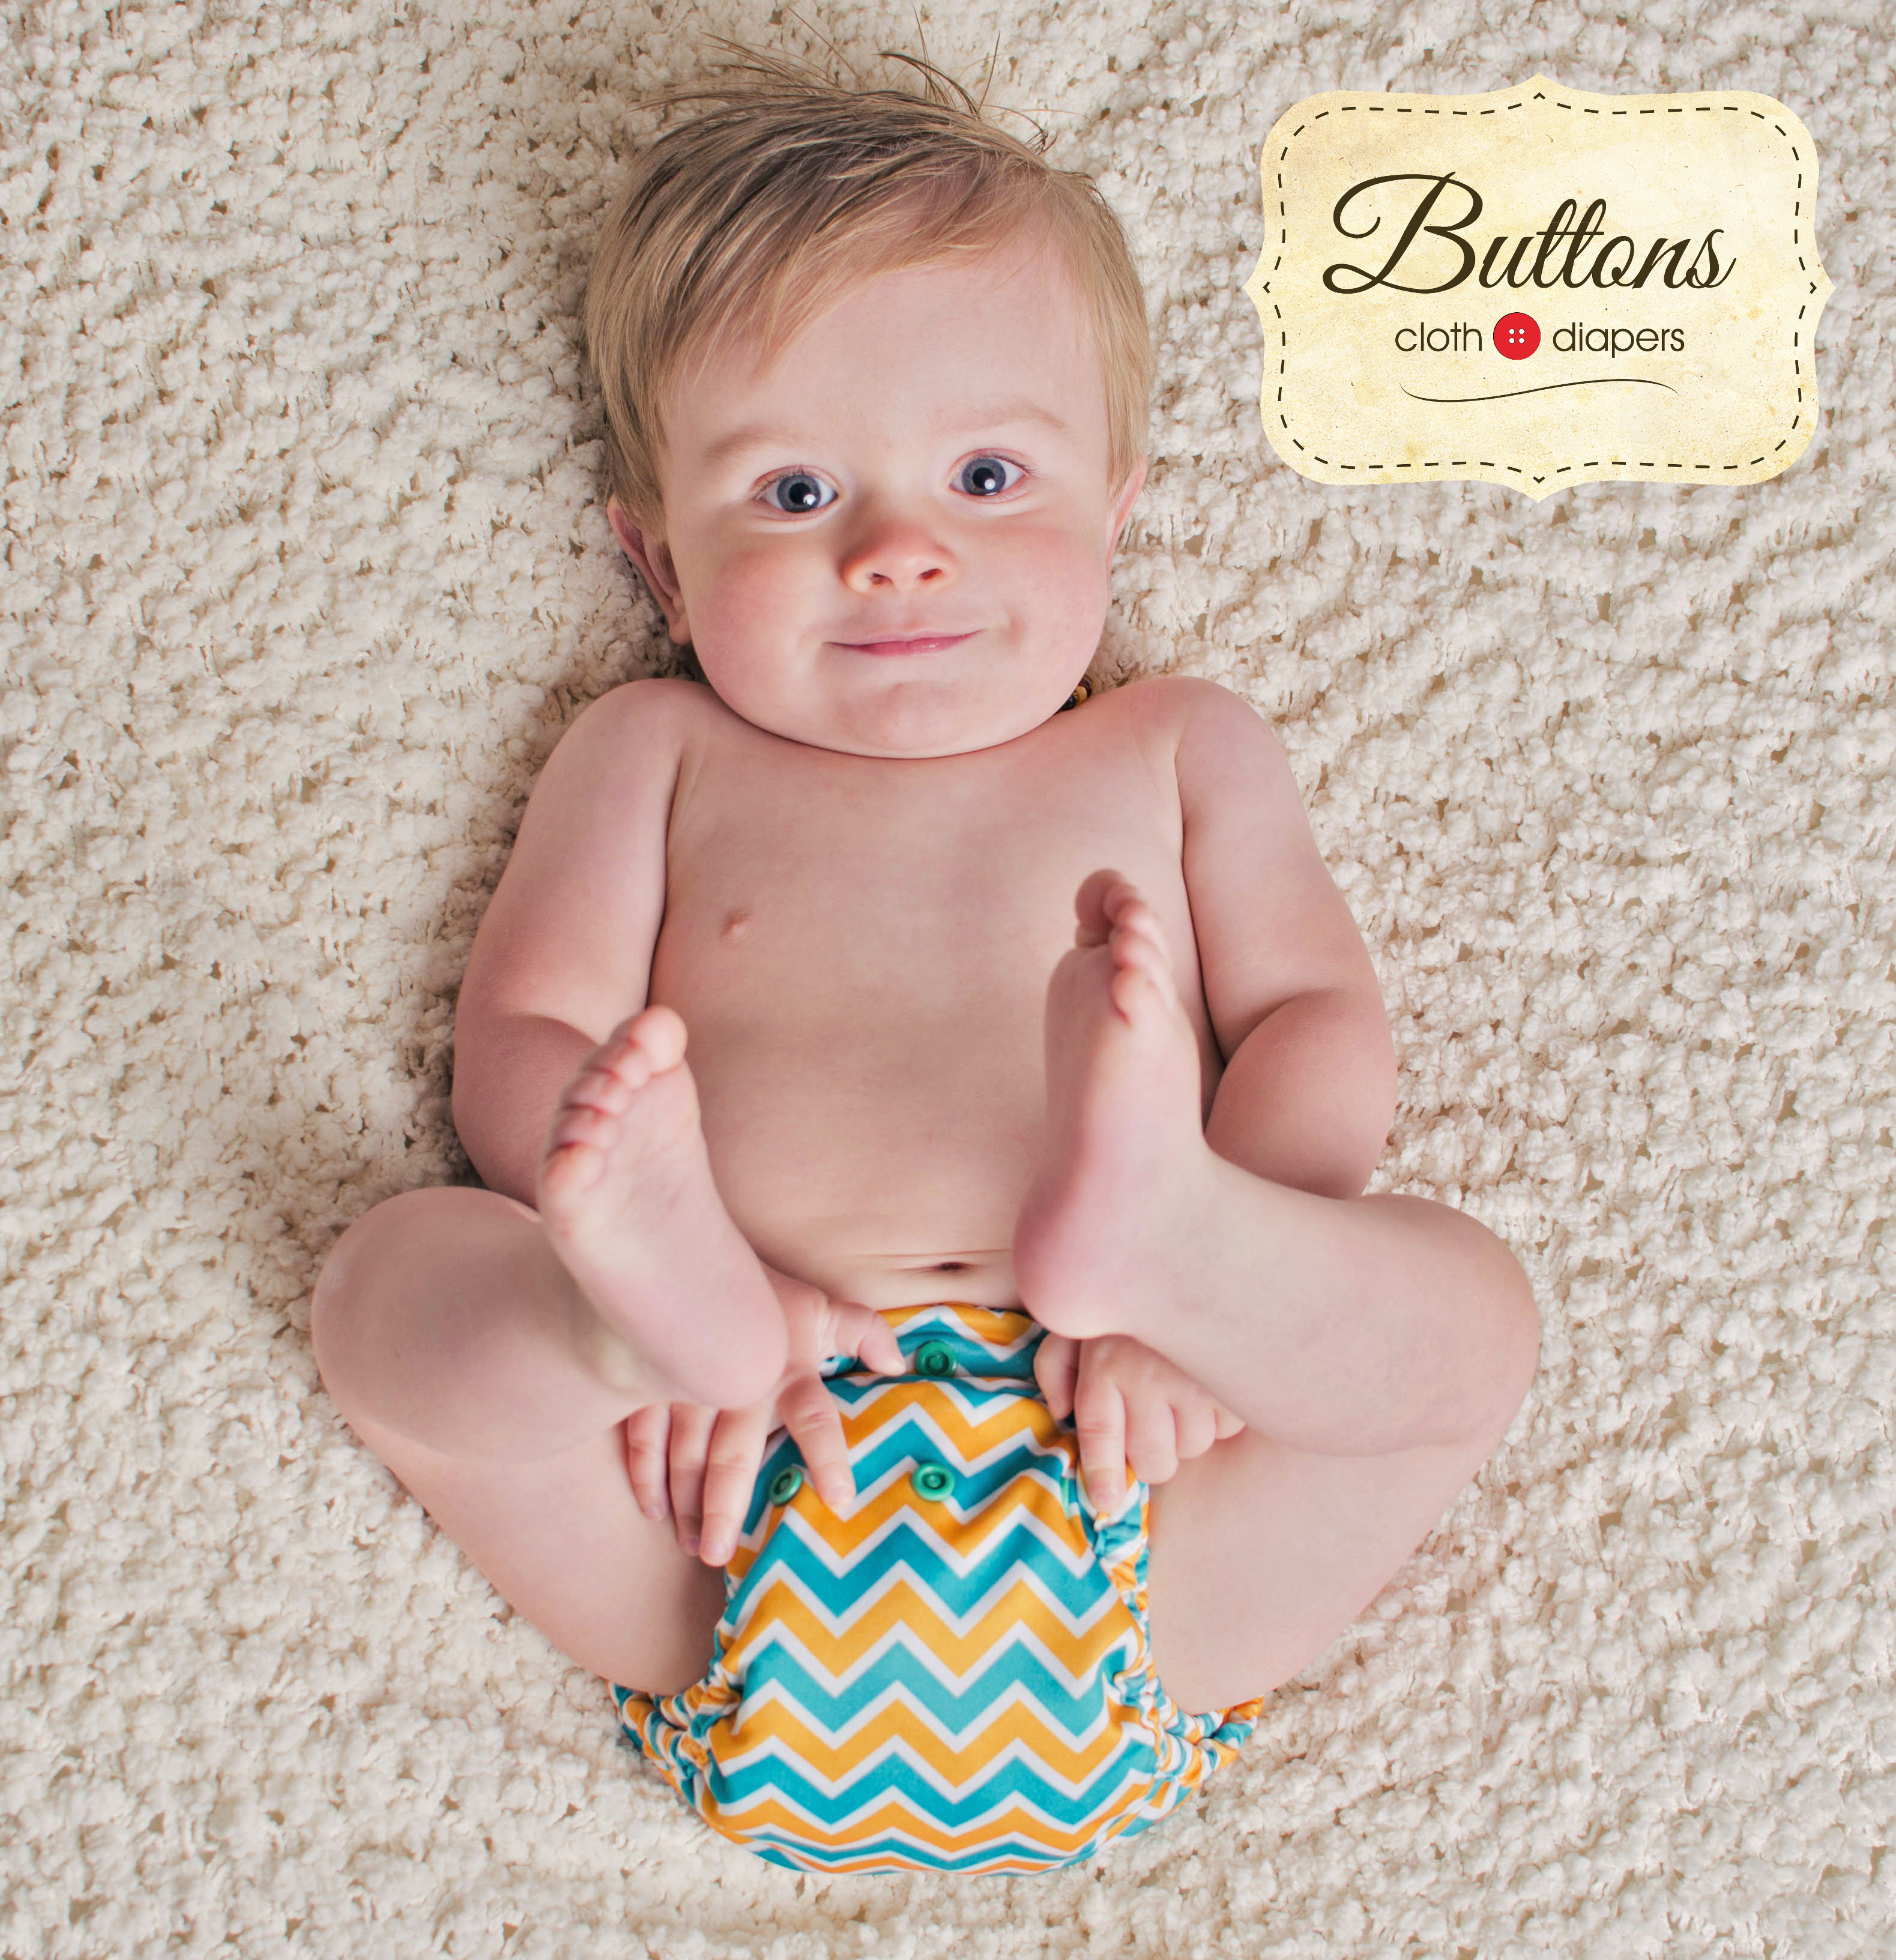 Buttons Cloth Diaper Review & Giveaway! - Positively Mommy